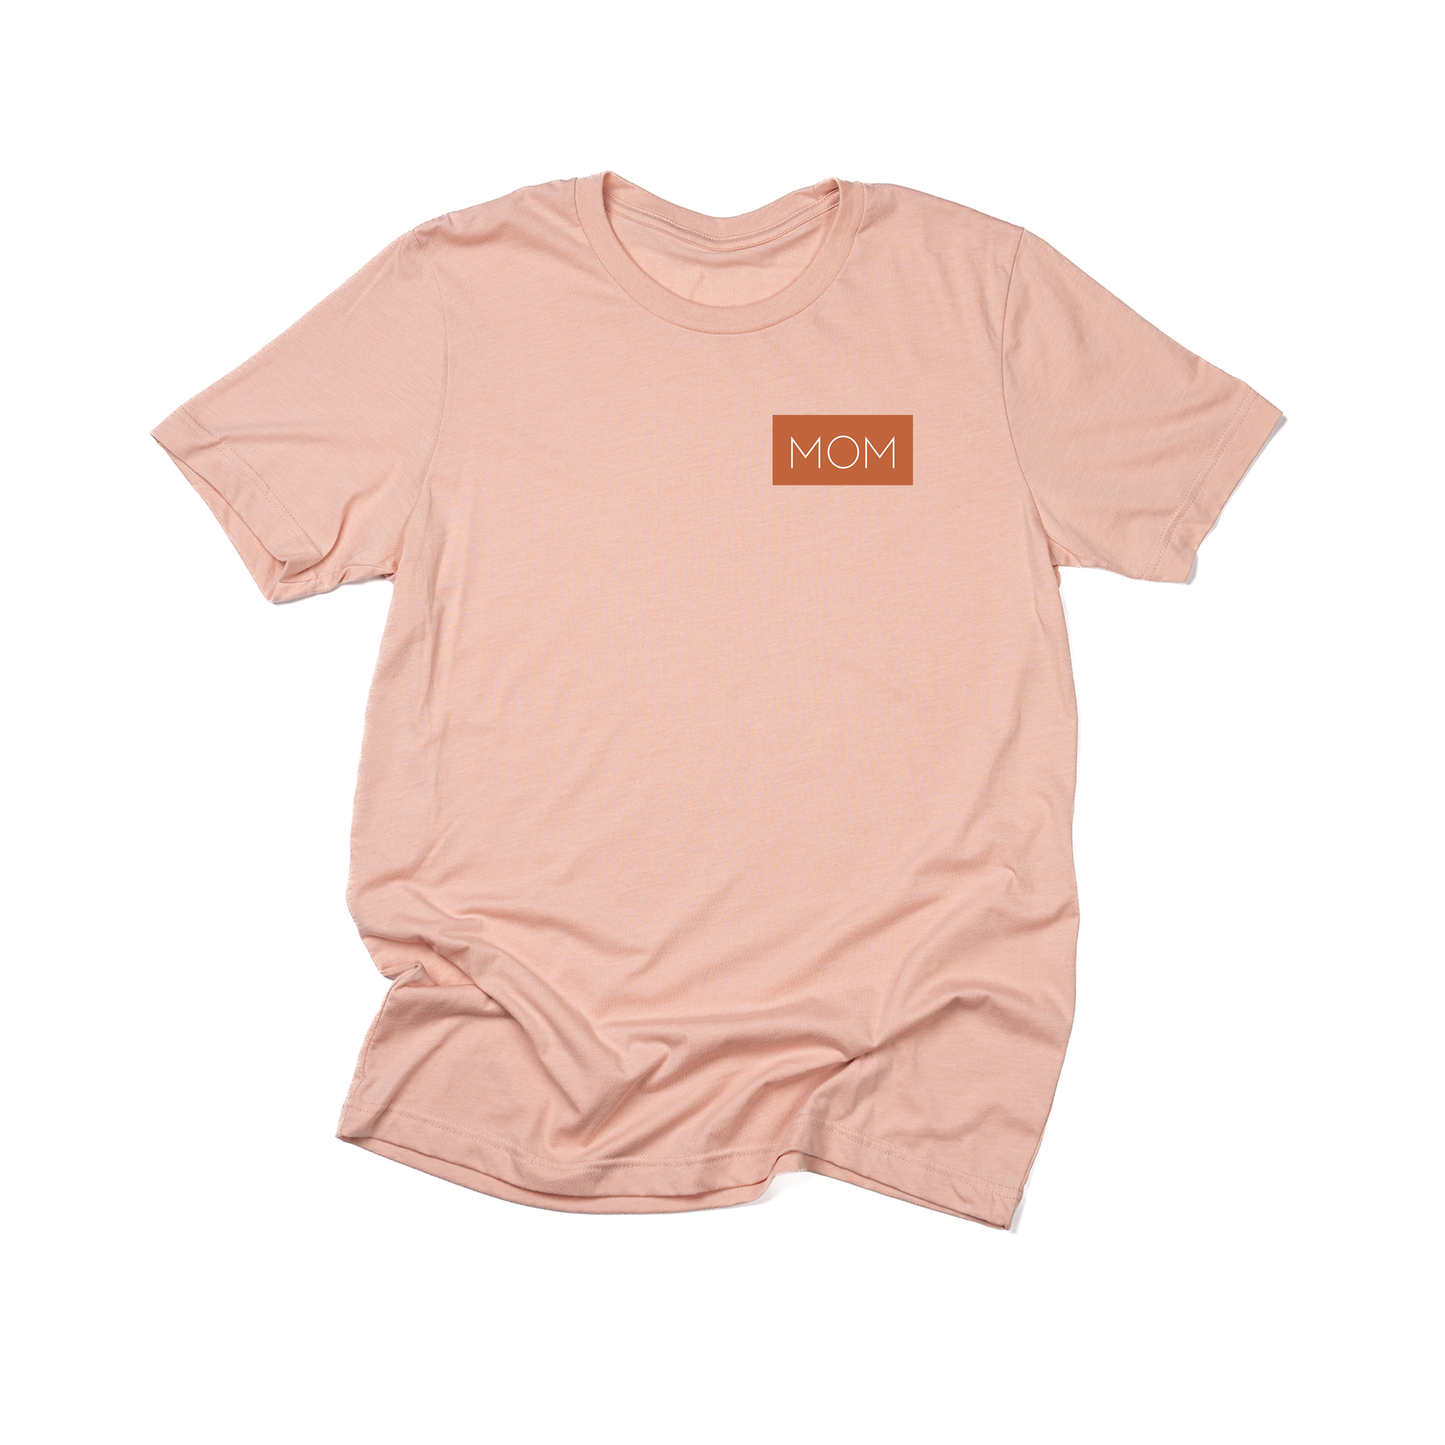 Mom (Boxed Collection, Pocket, Rust Box/White Text) - Tee (Peach)